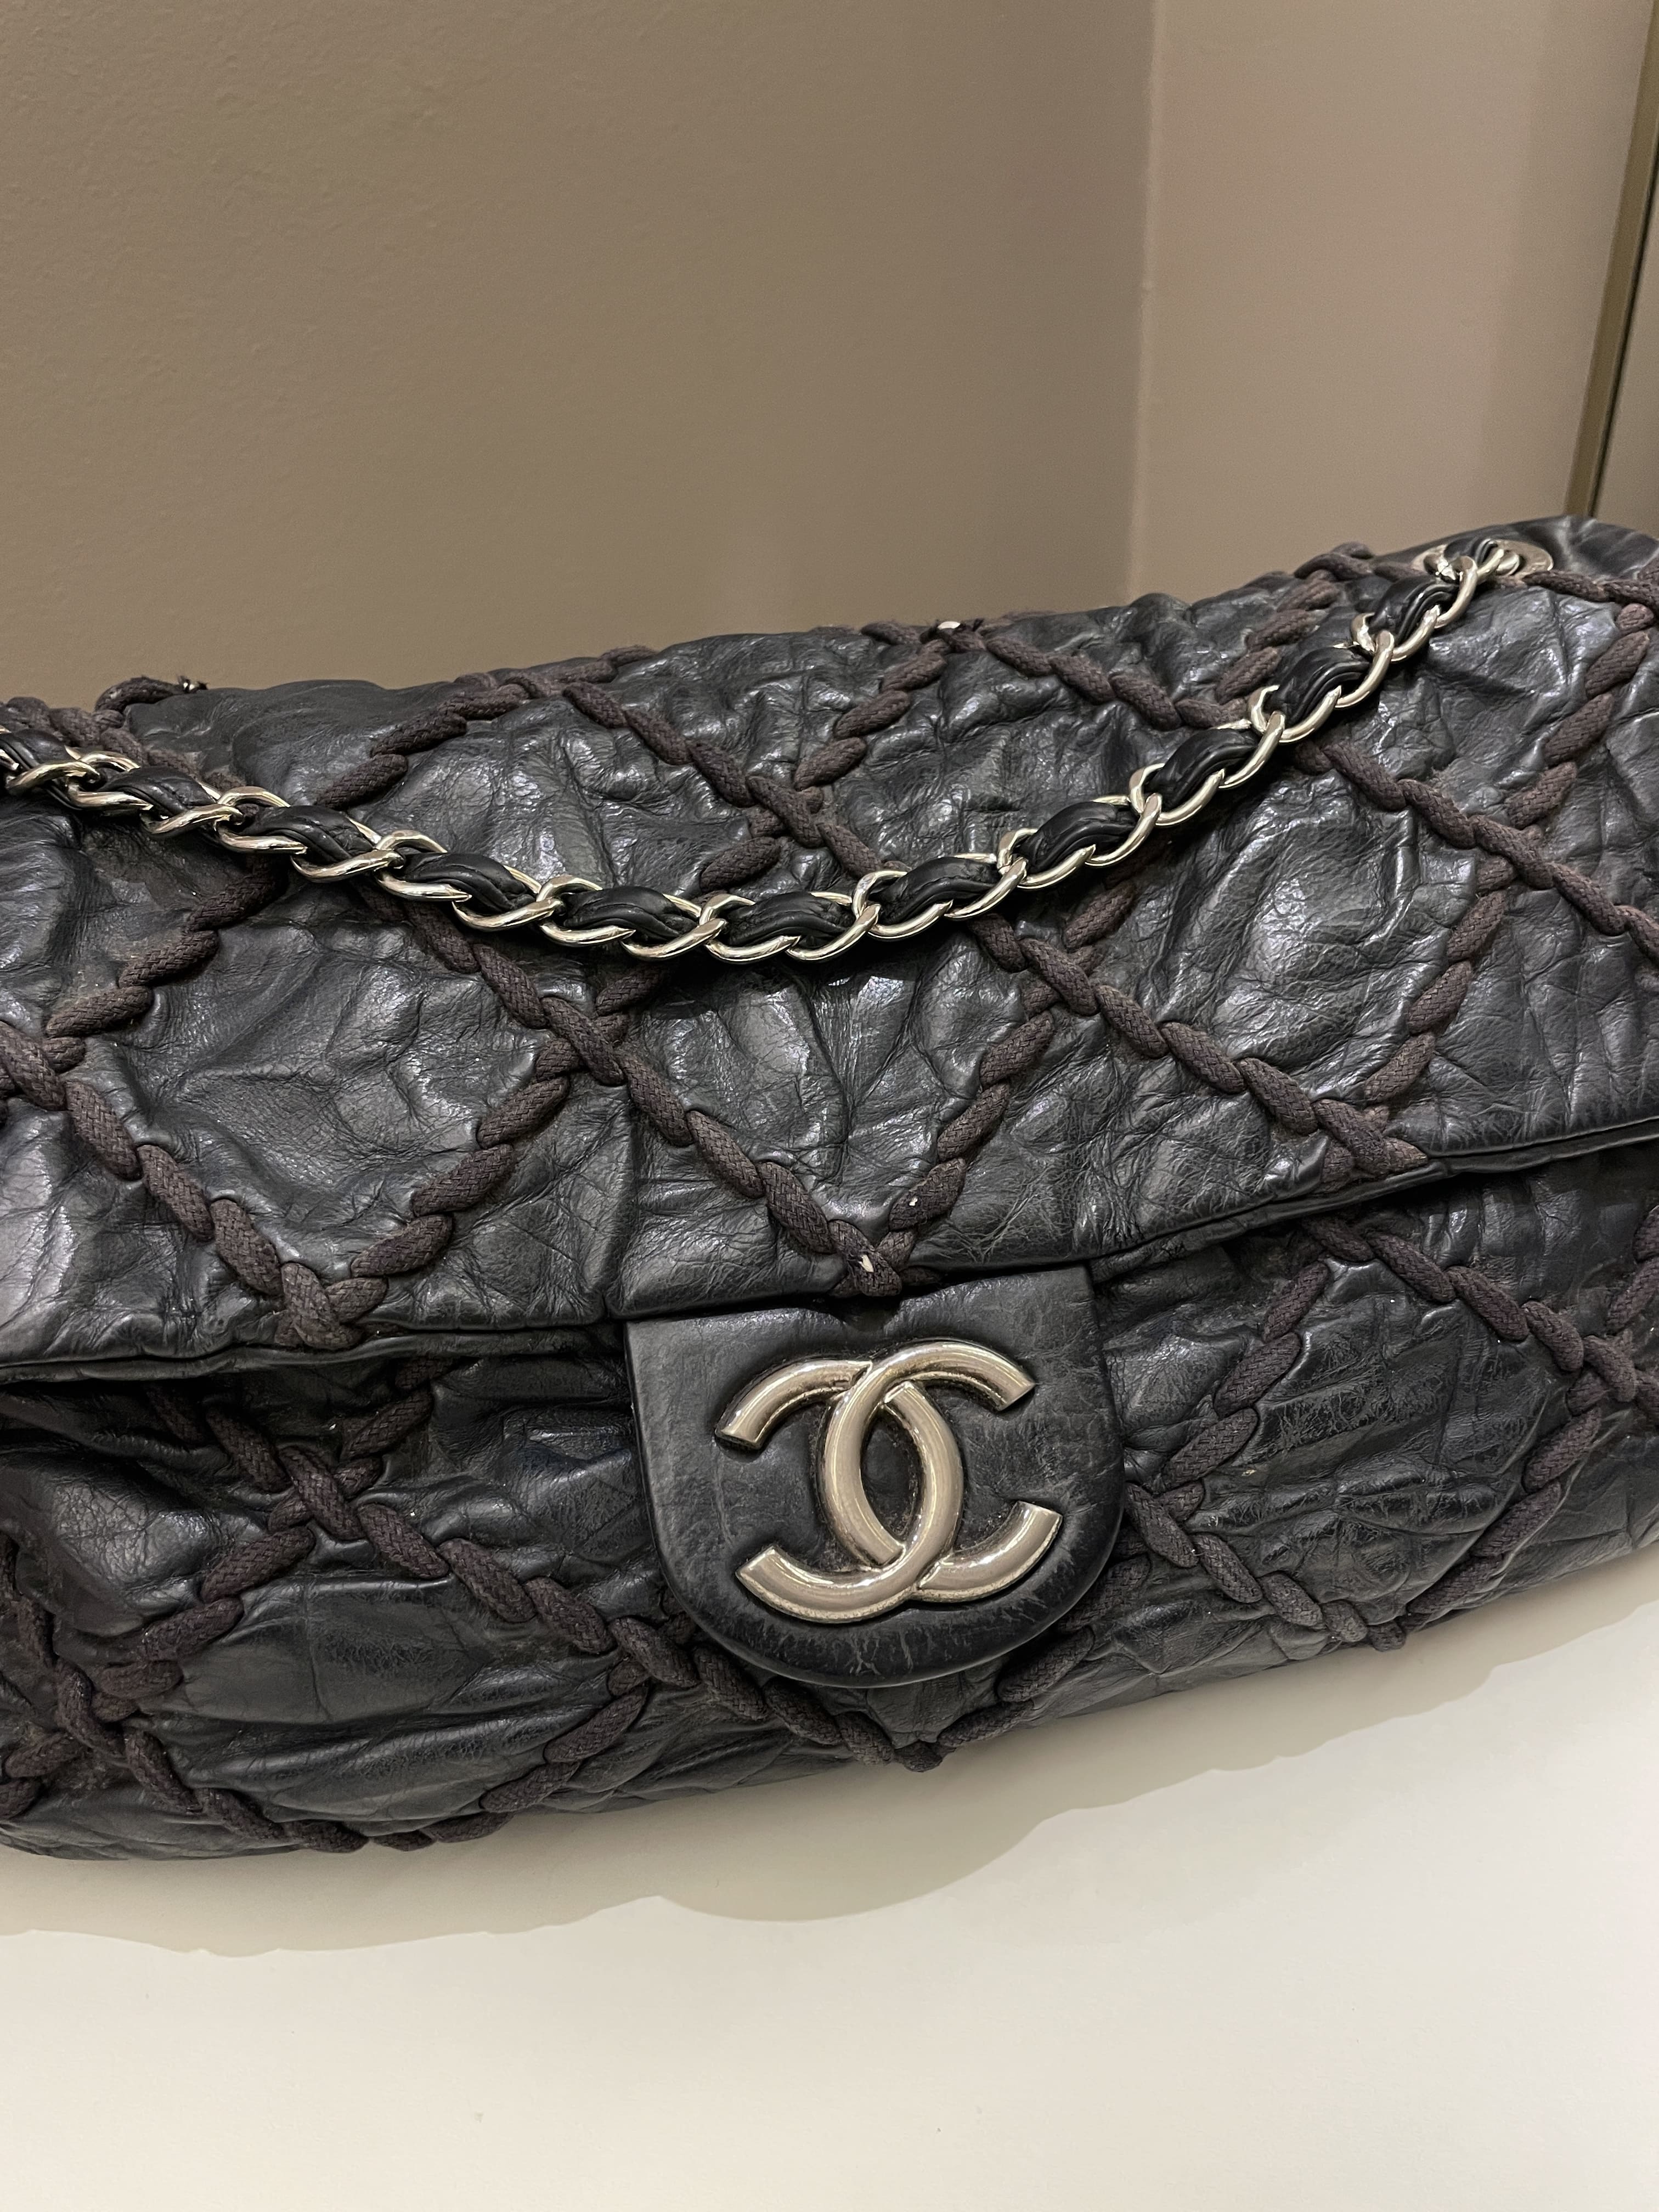 Chanel Ultra Stitch Classic Flap Black Distressed Leather